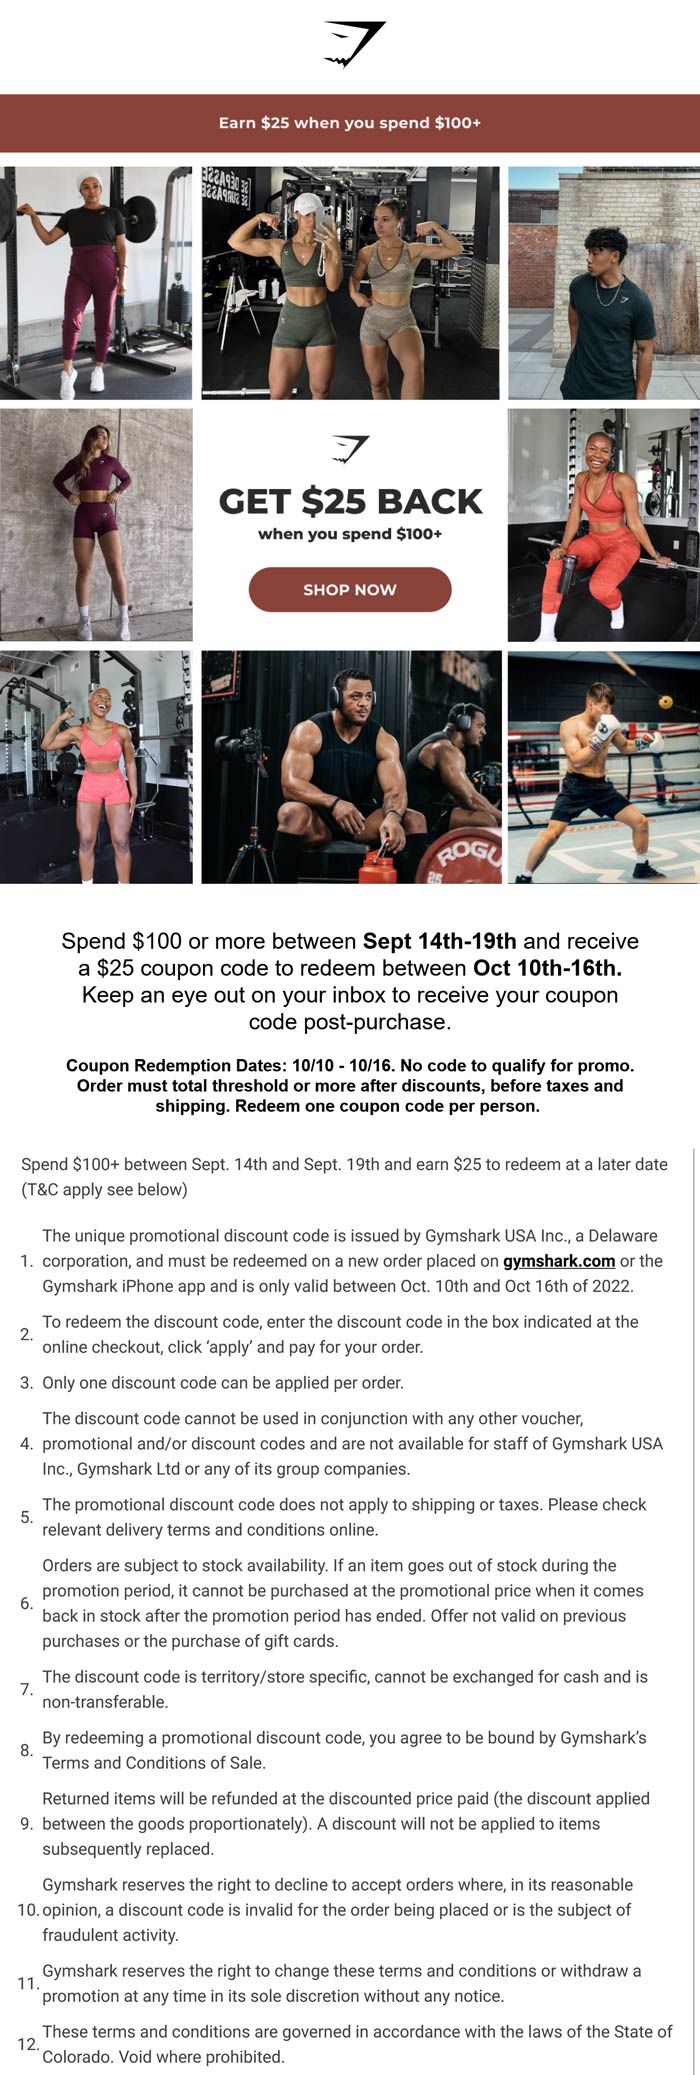 Gymshark stores Coupon  $25 future coupon on $100 spent at Gymshark #gymshark 